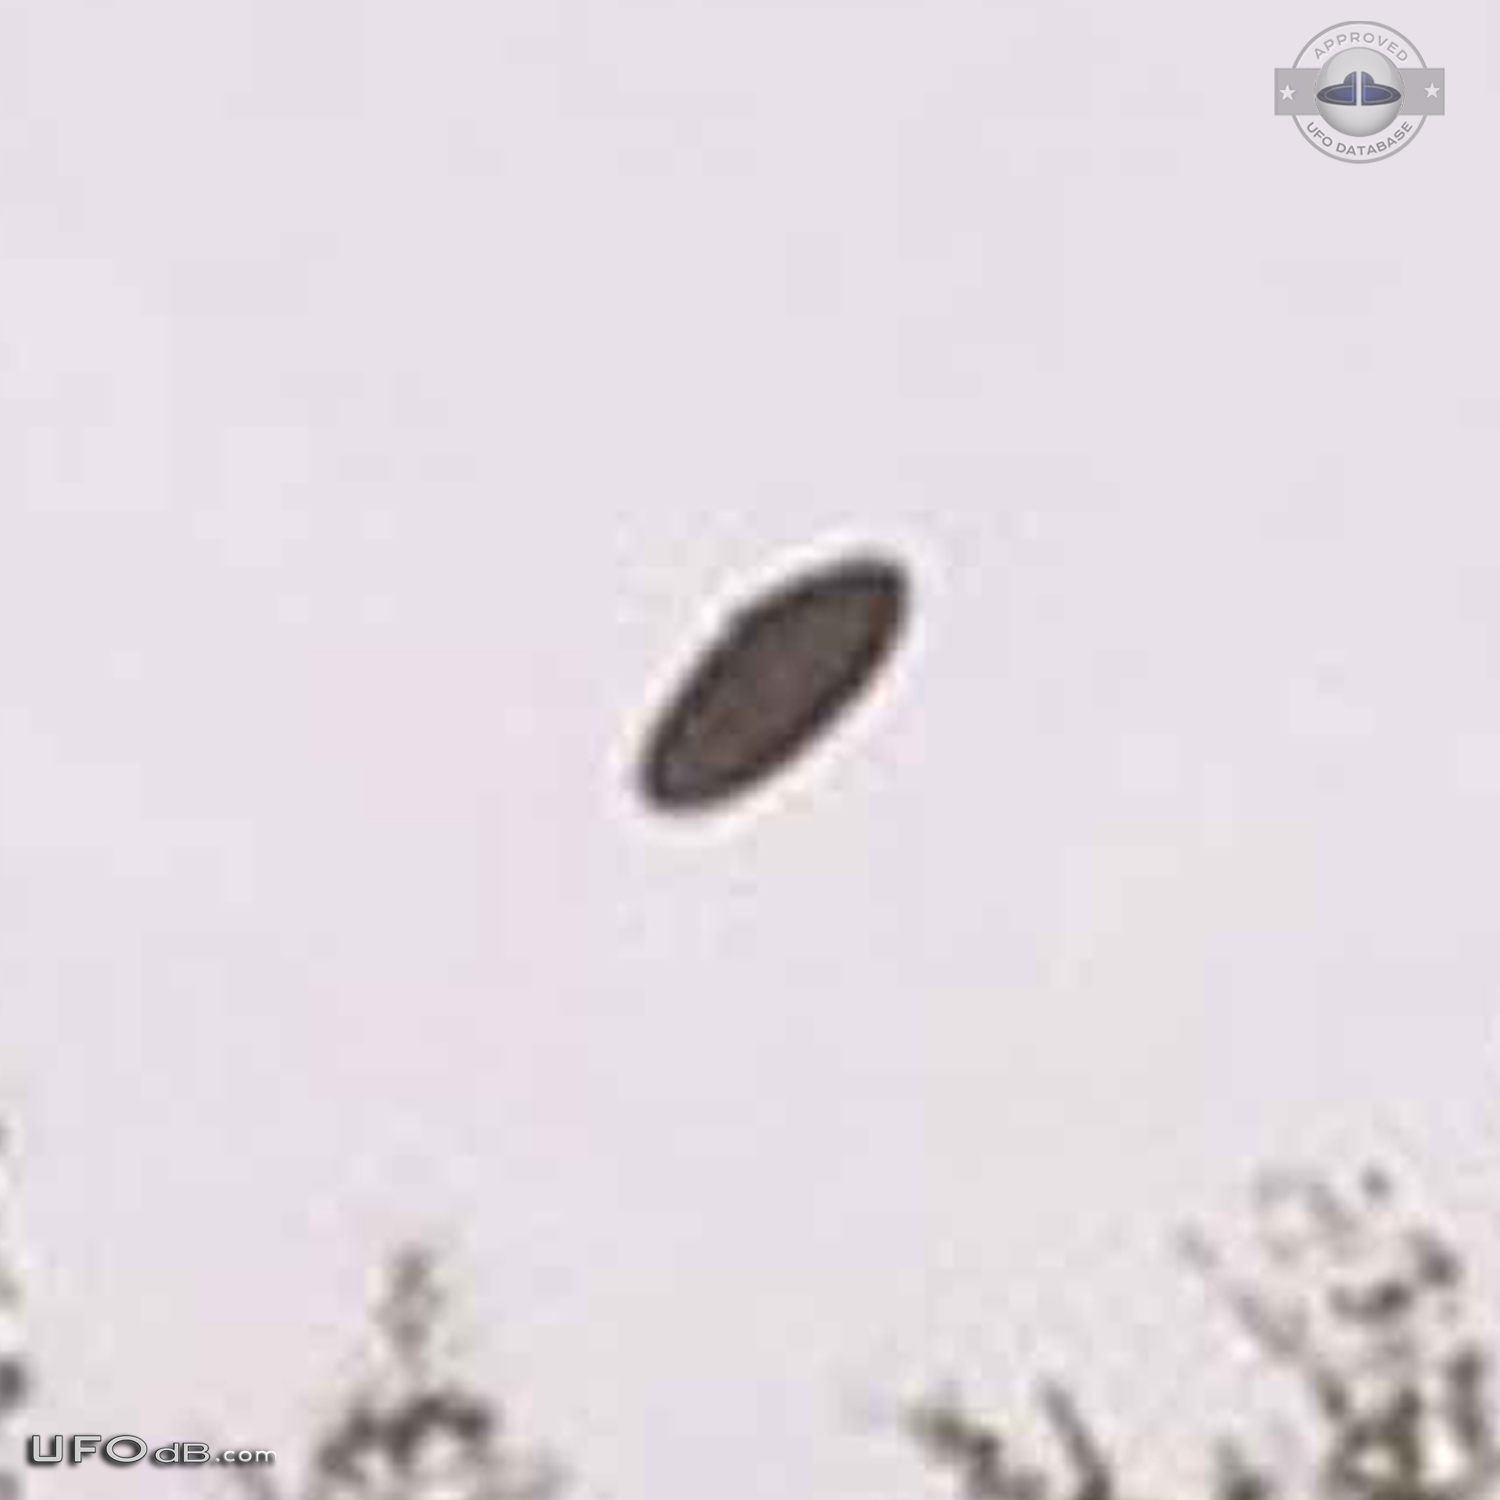 Poland 2003 Ufo sighting get aircrafts dispatched to check out the ufo UFO Picture #379-7